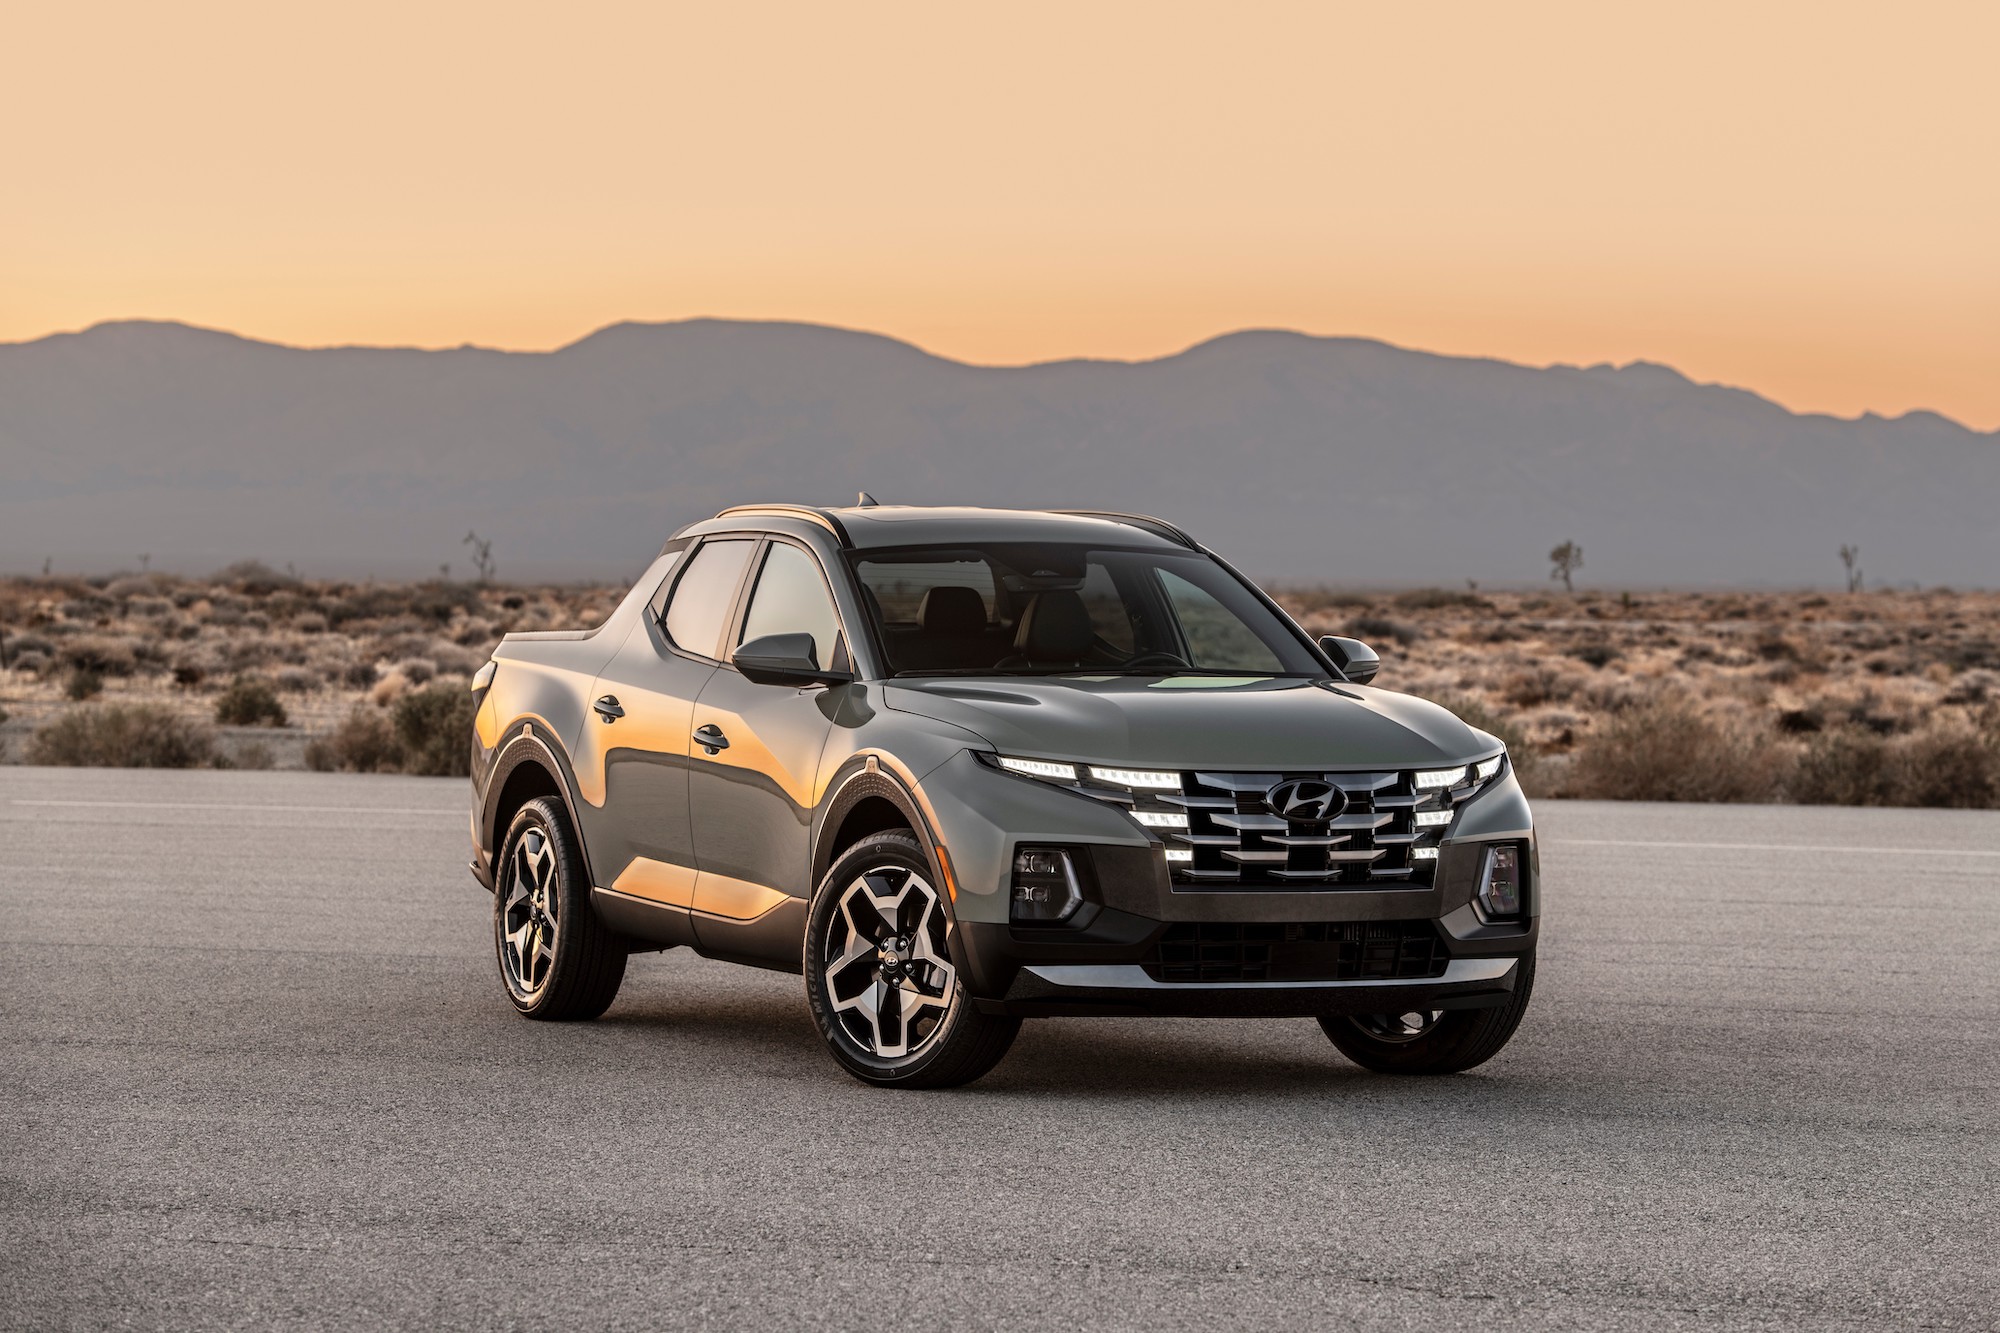 A gray 2022 Hyundai Santa Cruz parked on the pavement in a desert with mountains